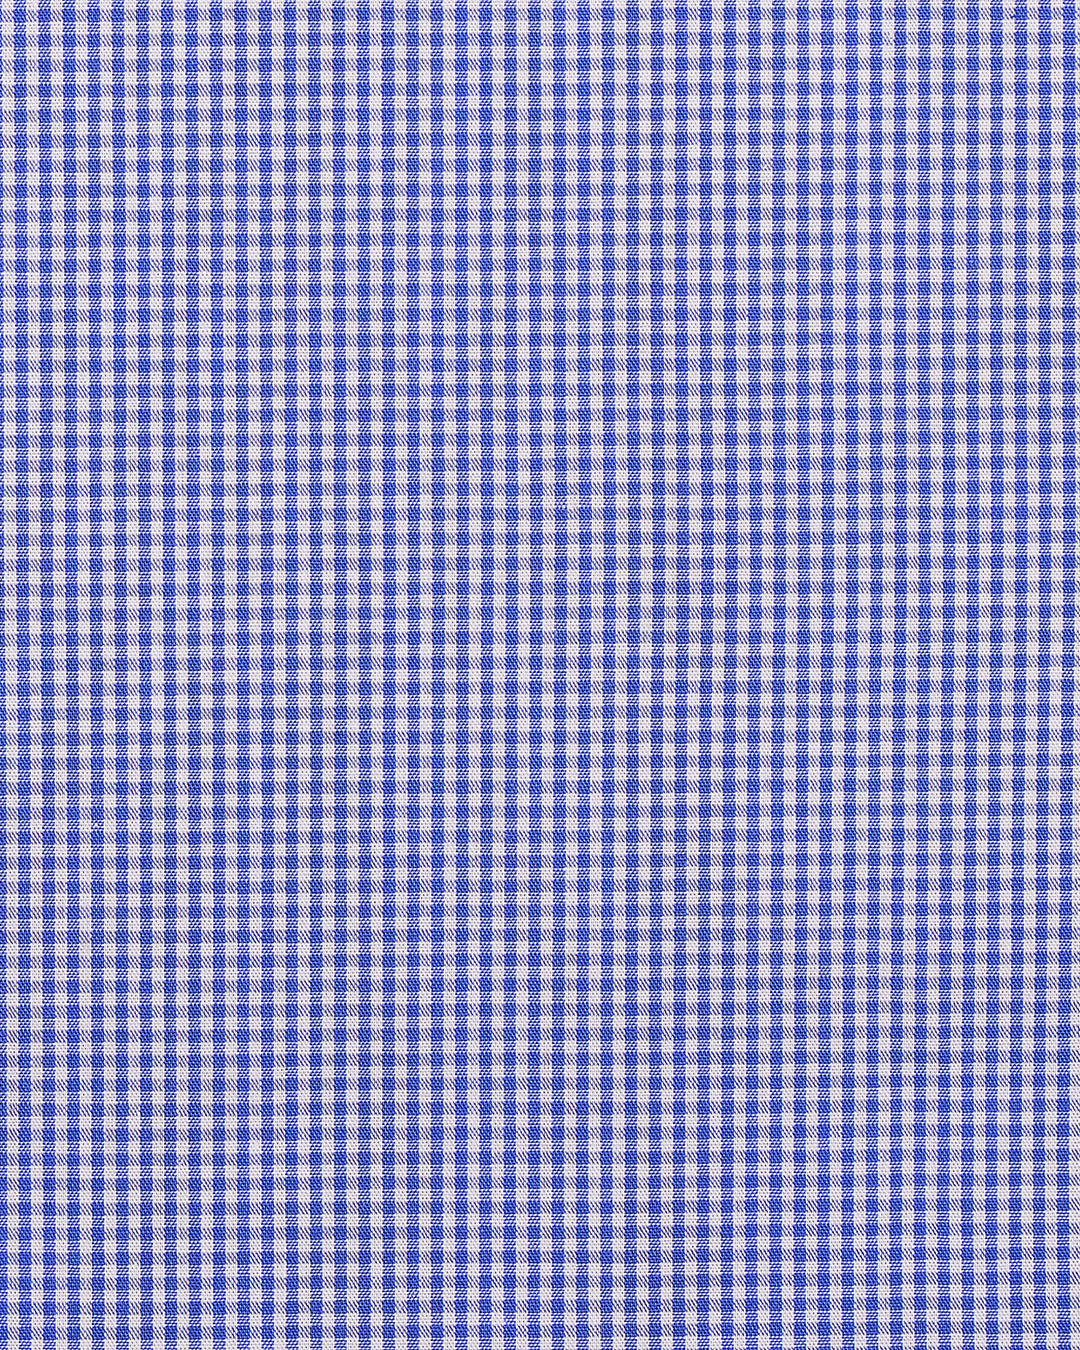 Close up view of custom check shirts for men by Luxire sapphire blue gingham